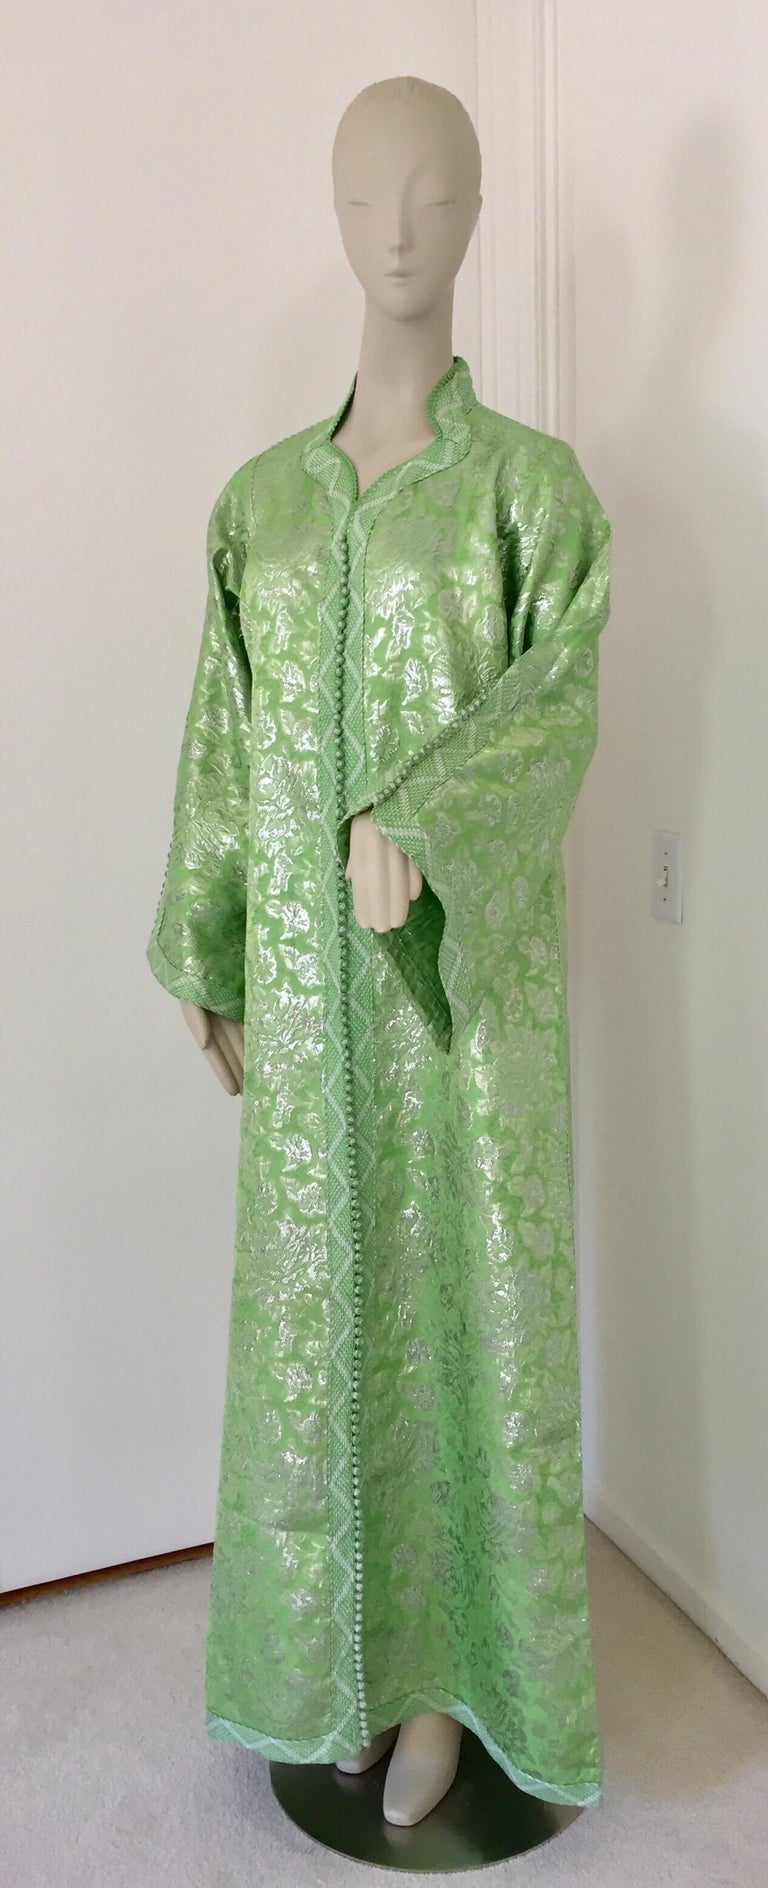 Elegant Moroccan Caftan Lime Green and Silver Metallic Floral Brocade In Good Condition For Sale In North Hollywood, CA